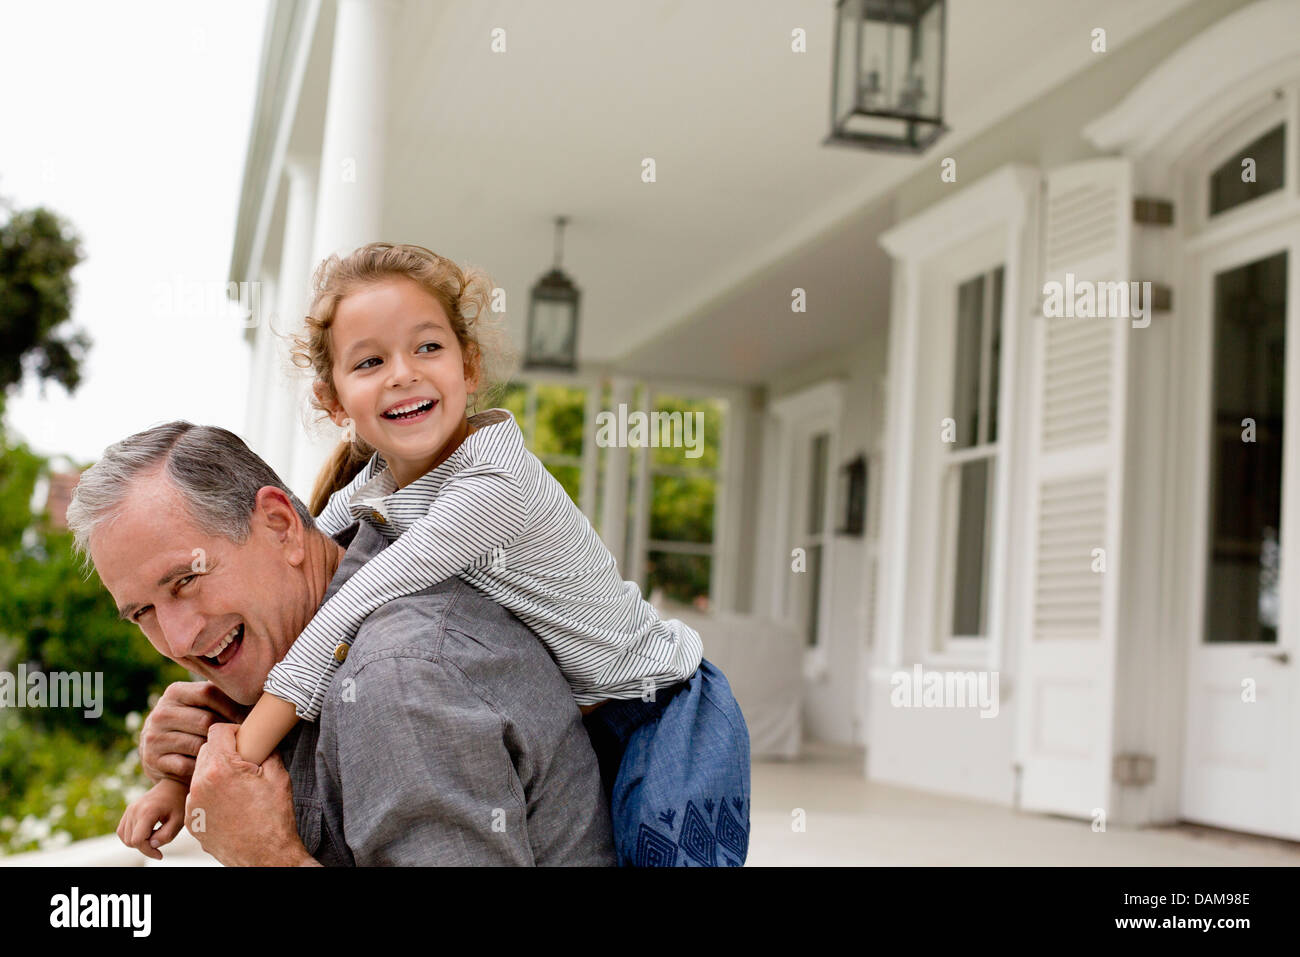 Older man carrying granddaughter piggy back on porch Stock Photo